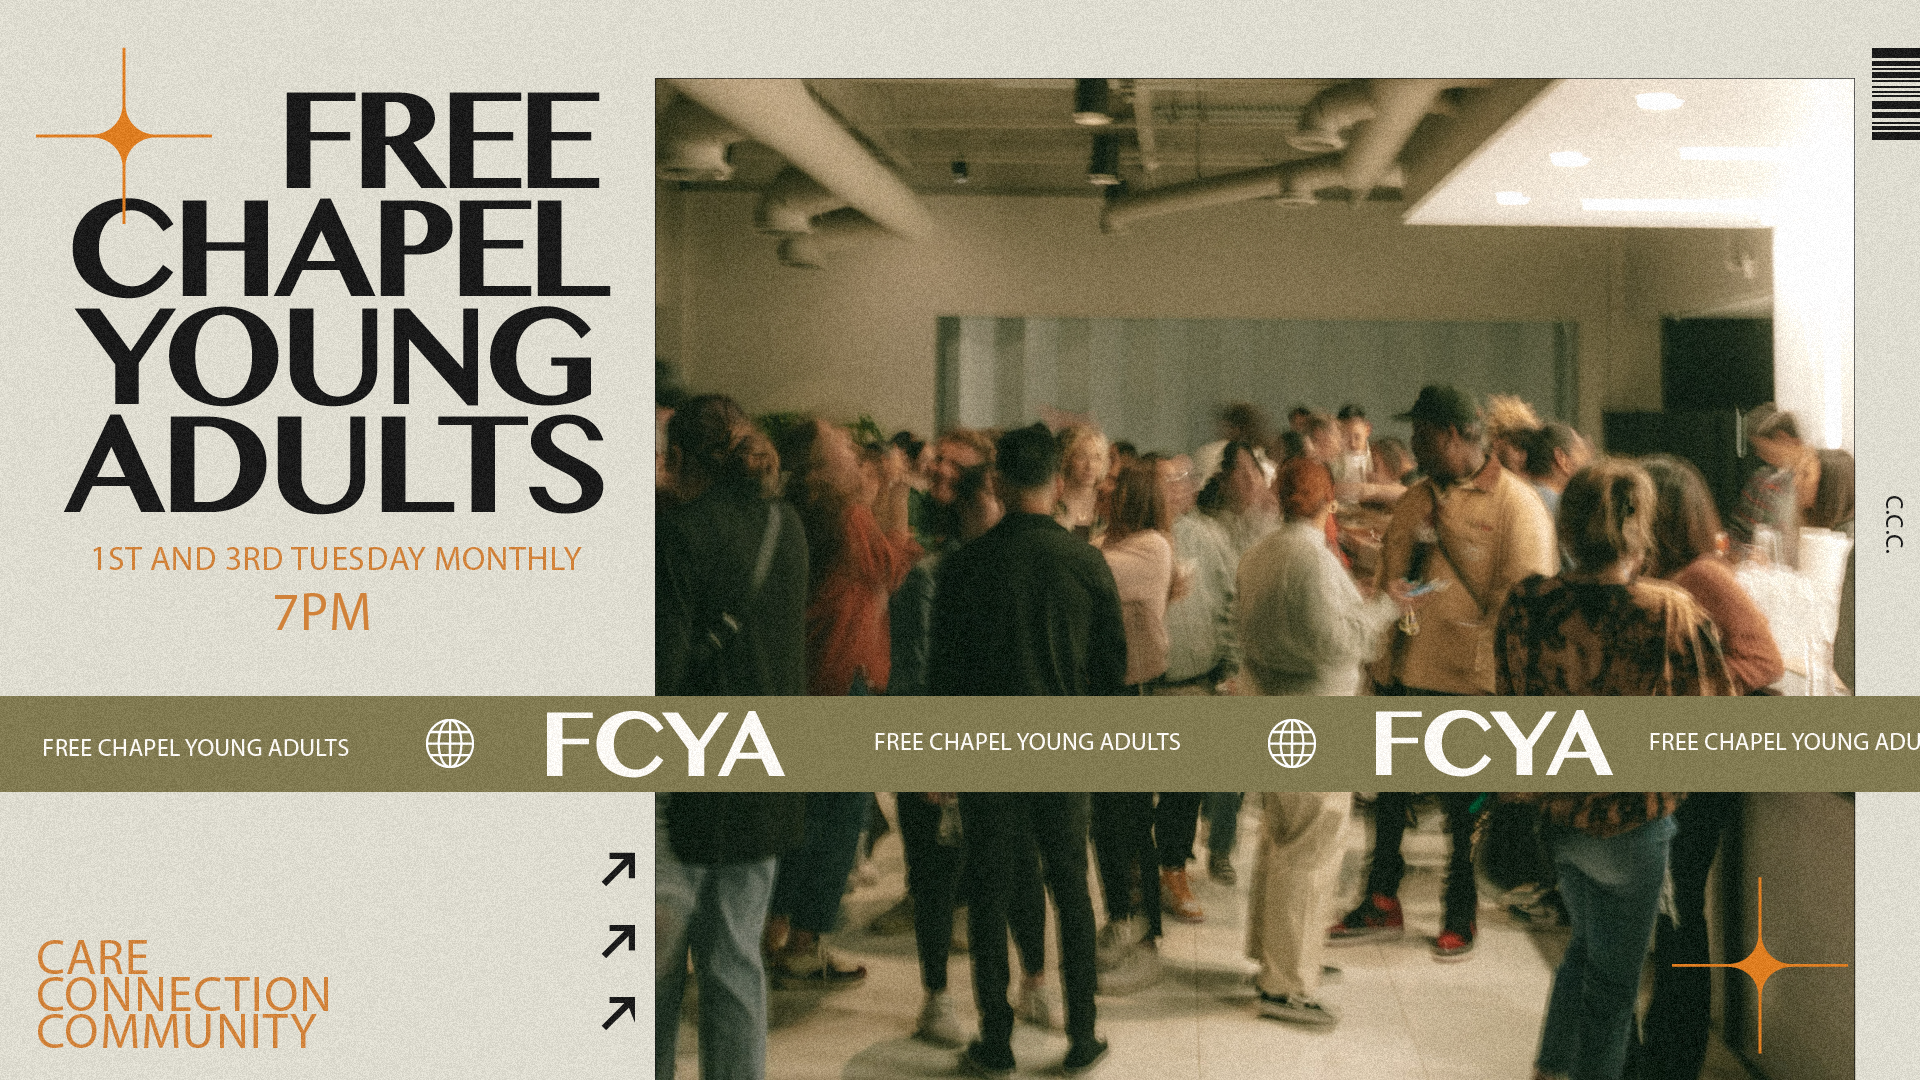 FCYA: First and Third Tuesday at the Cumming campus